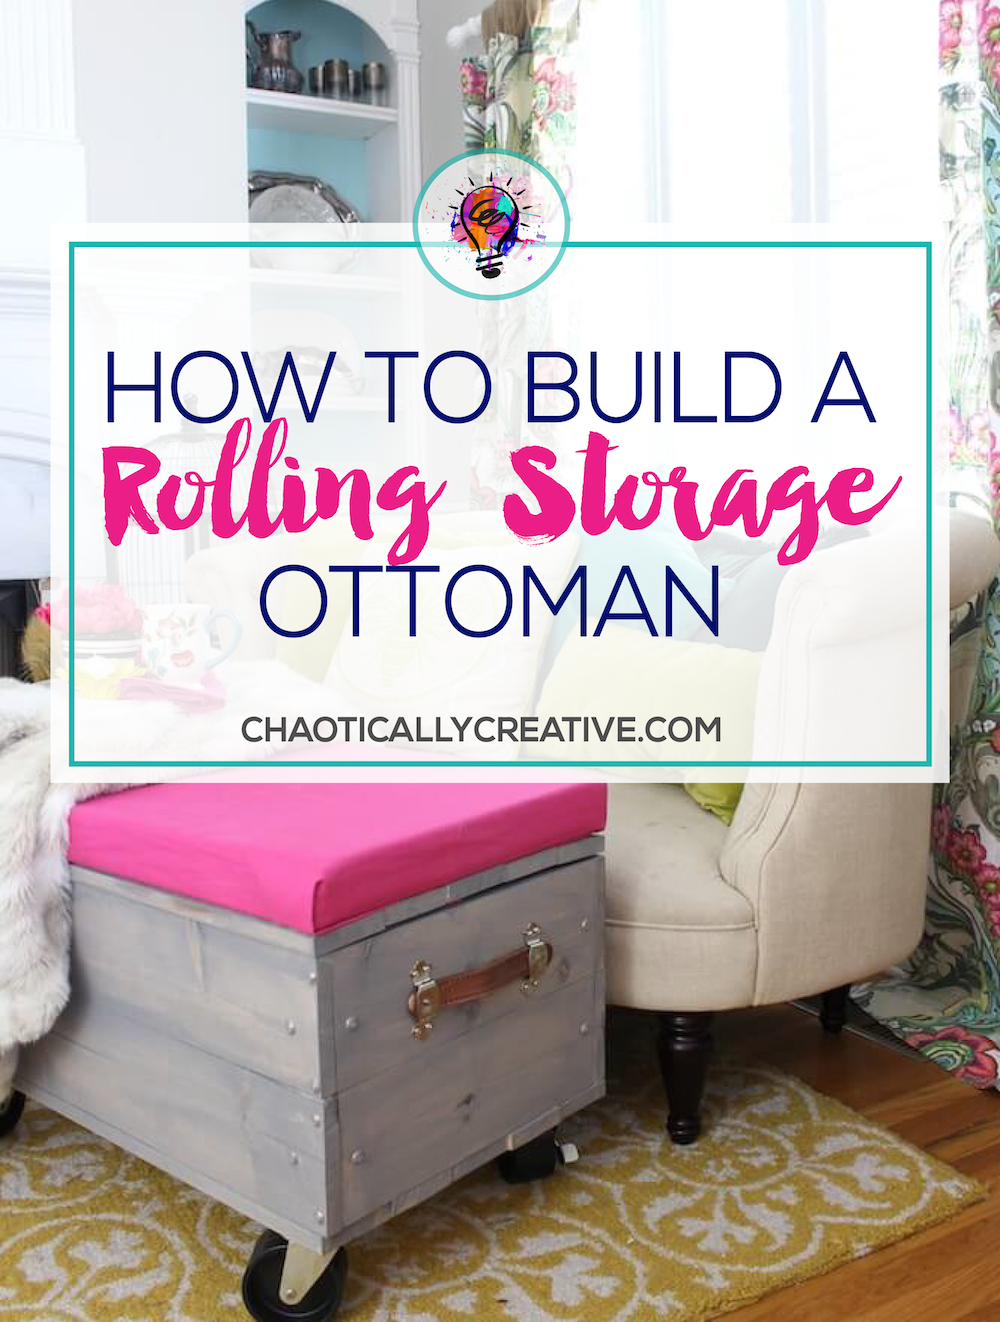 How to Build a Rolling Storage Ottoman